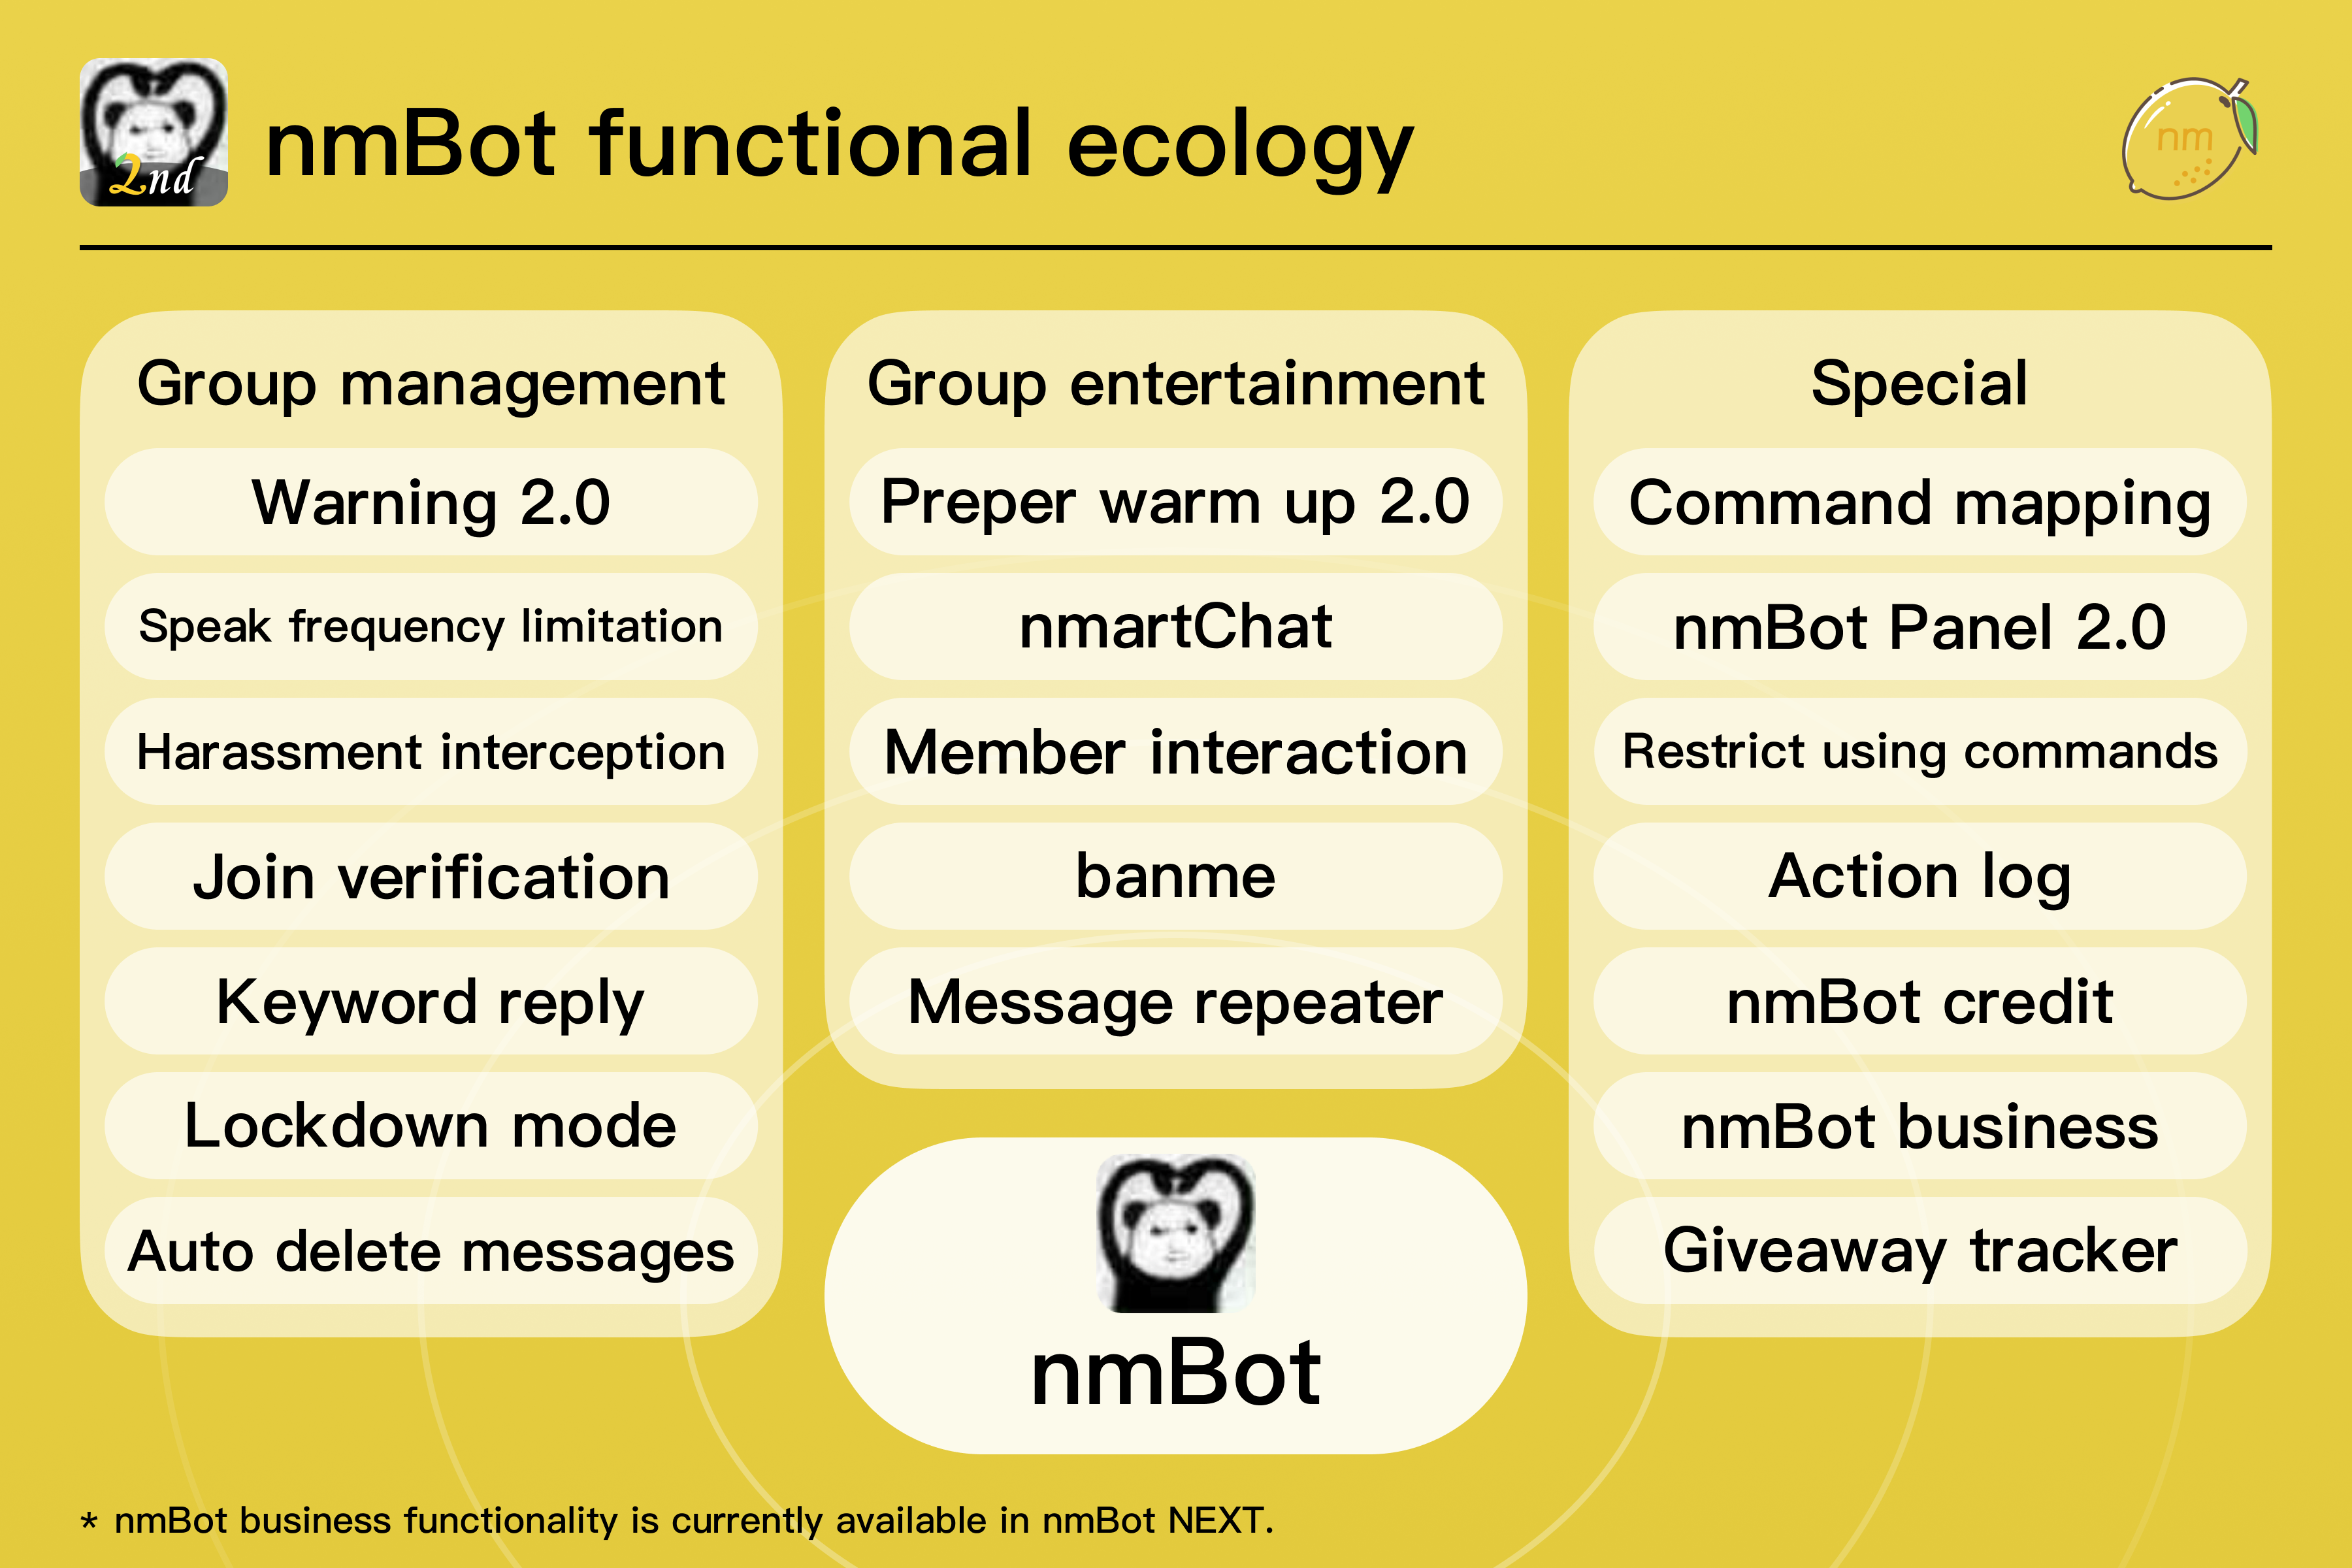 nmBot's rich functional ecology has been further developed and improved. 